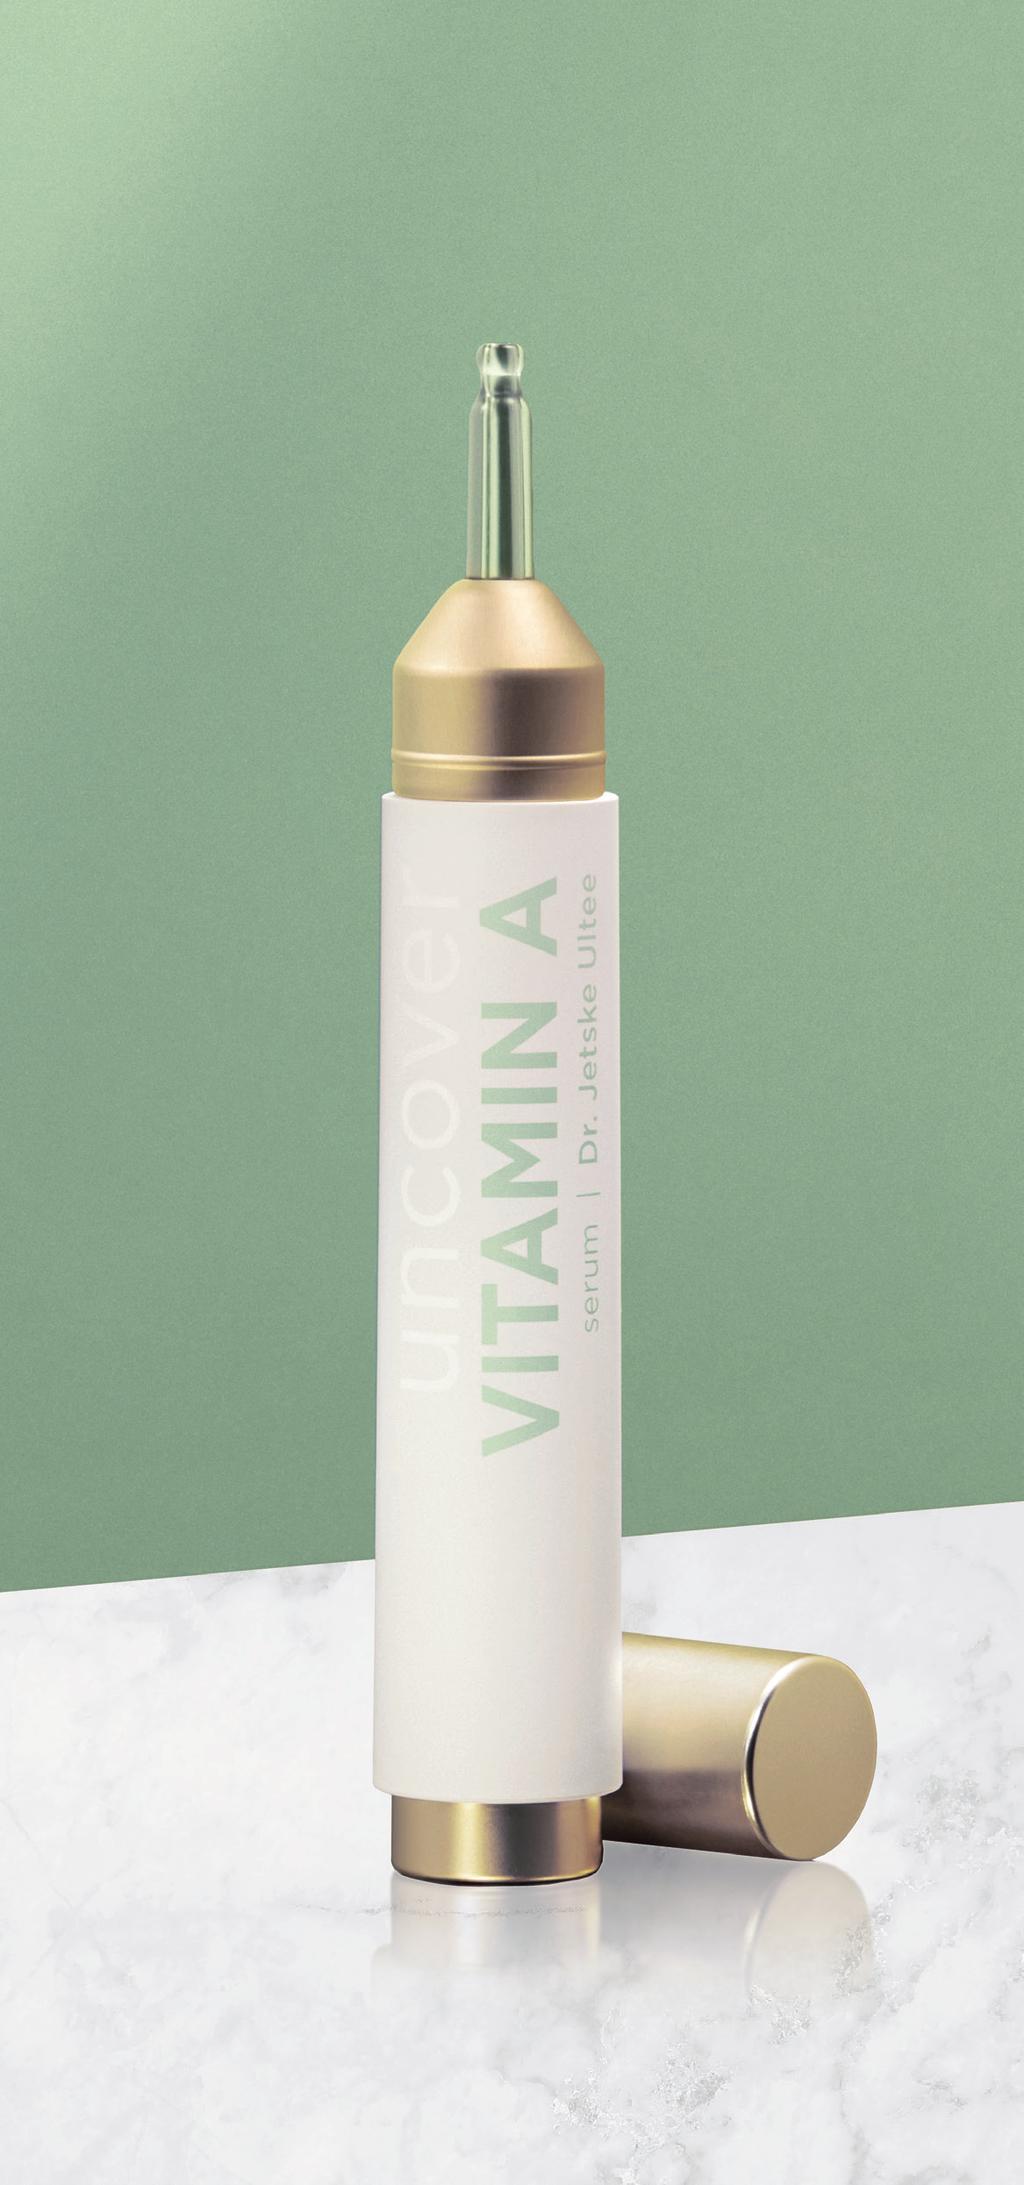 VITAMIN A SERUM NEW The mild alternative to Vitamin A Acid cream Available without a prescription Unique, stable form of Vitamin A Helps combat skin ageing and makes the skin smoother and more even